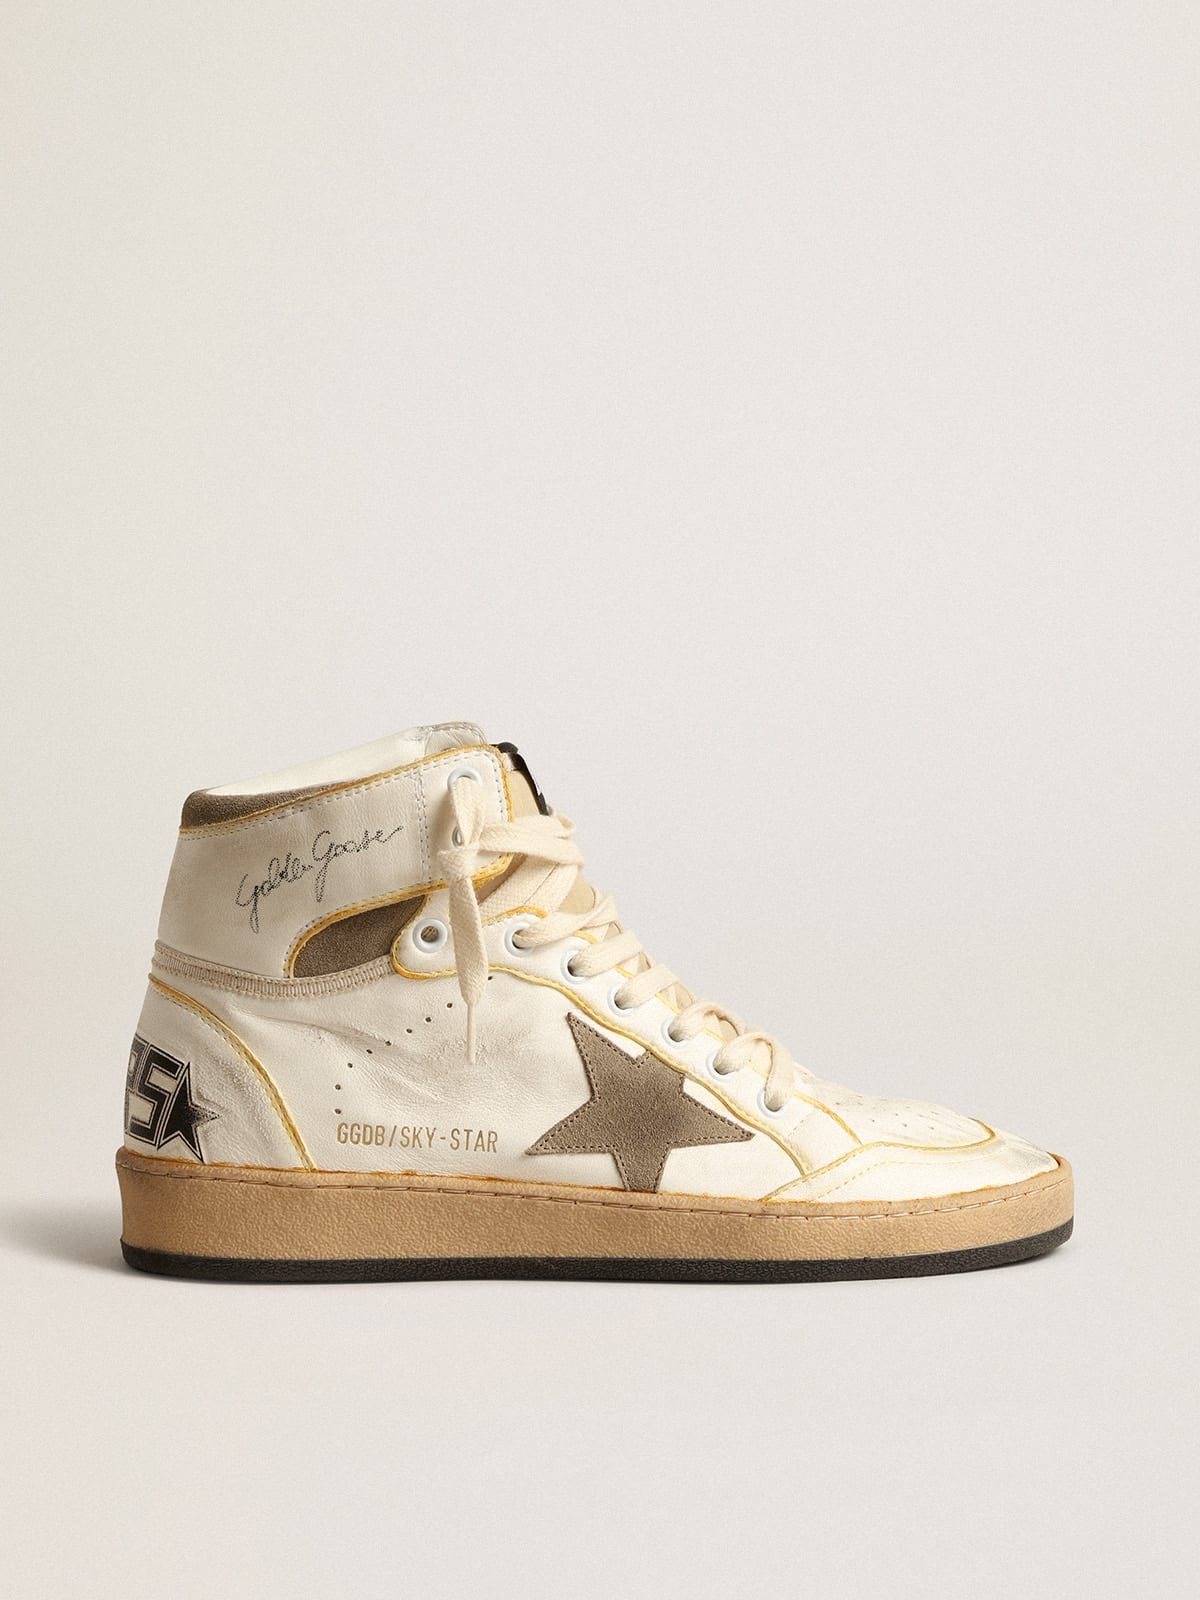 Women’s Sky-Star in white nappa leather with dove-gray suede star - 1